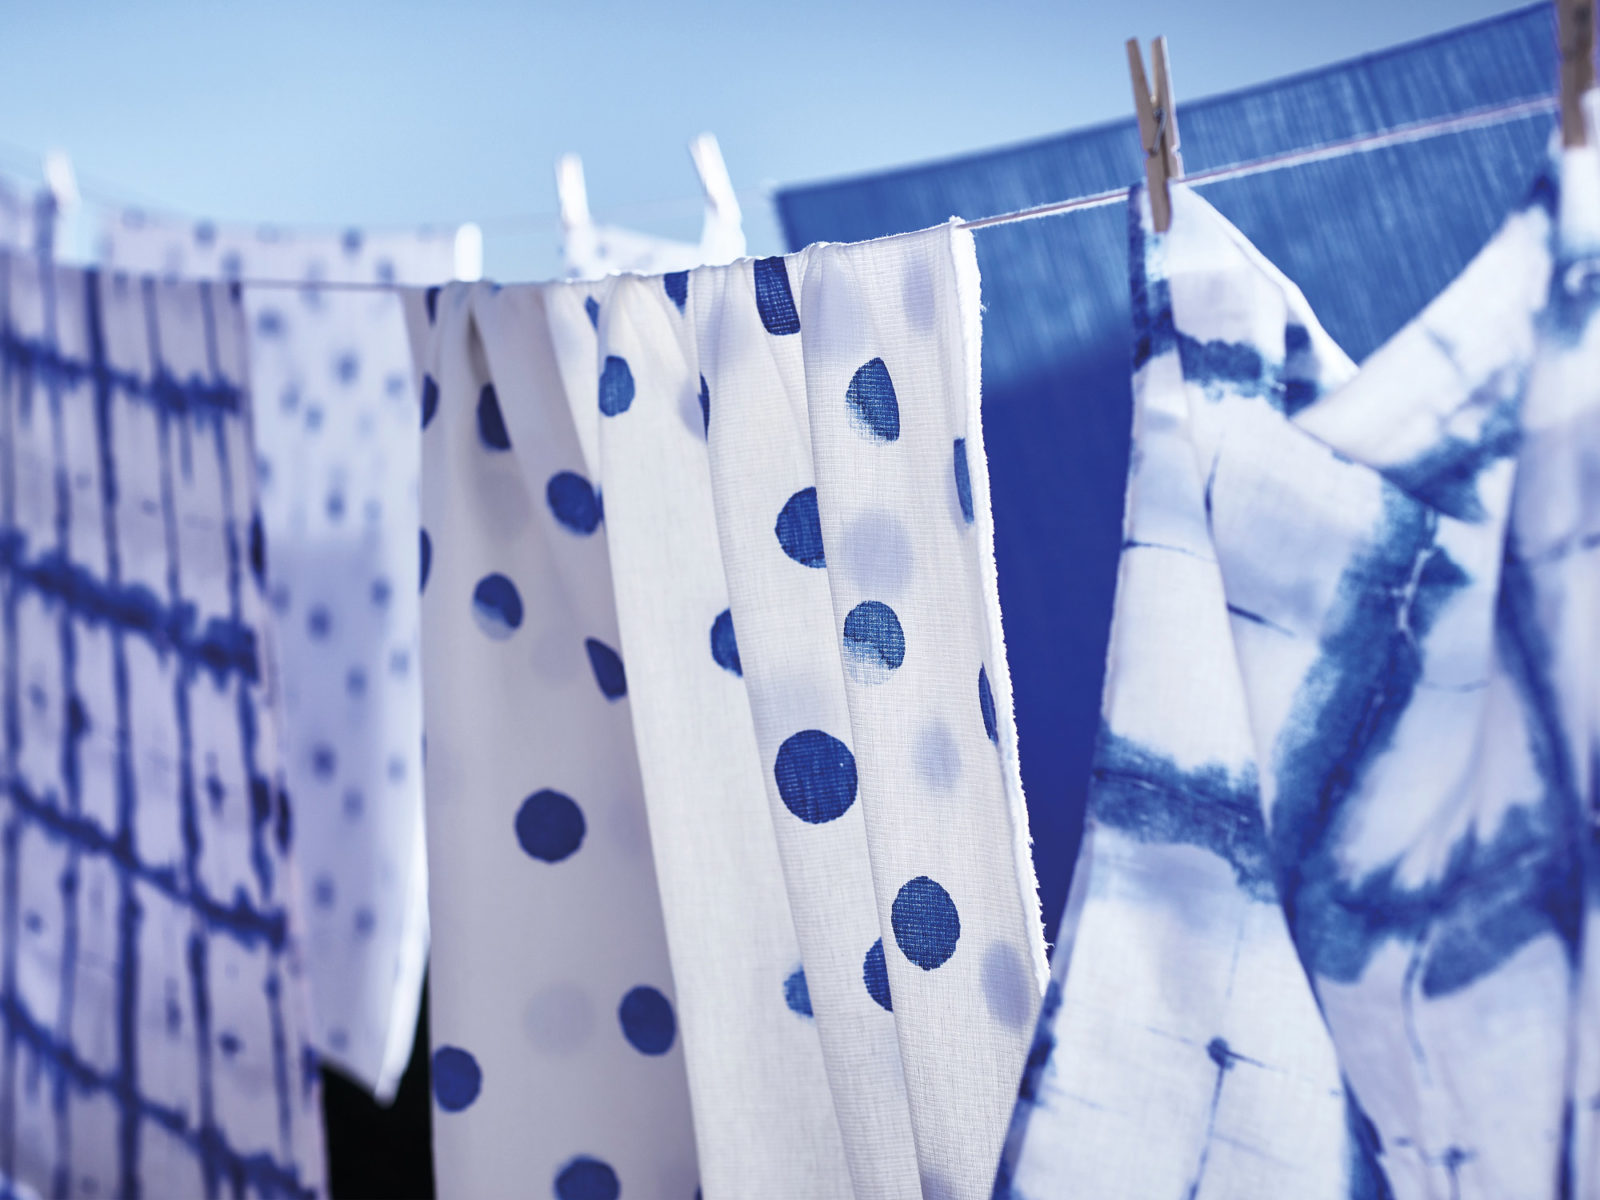 Textiles in different blue and white patterns hanging on clothes line against blue sky.